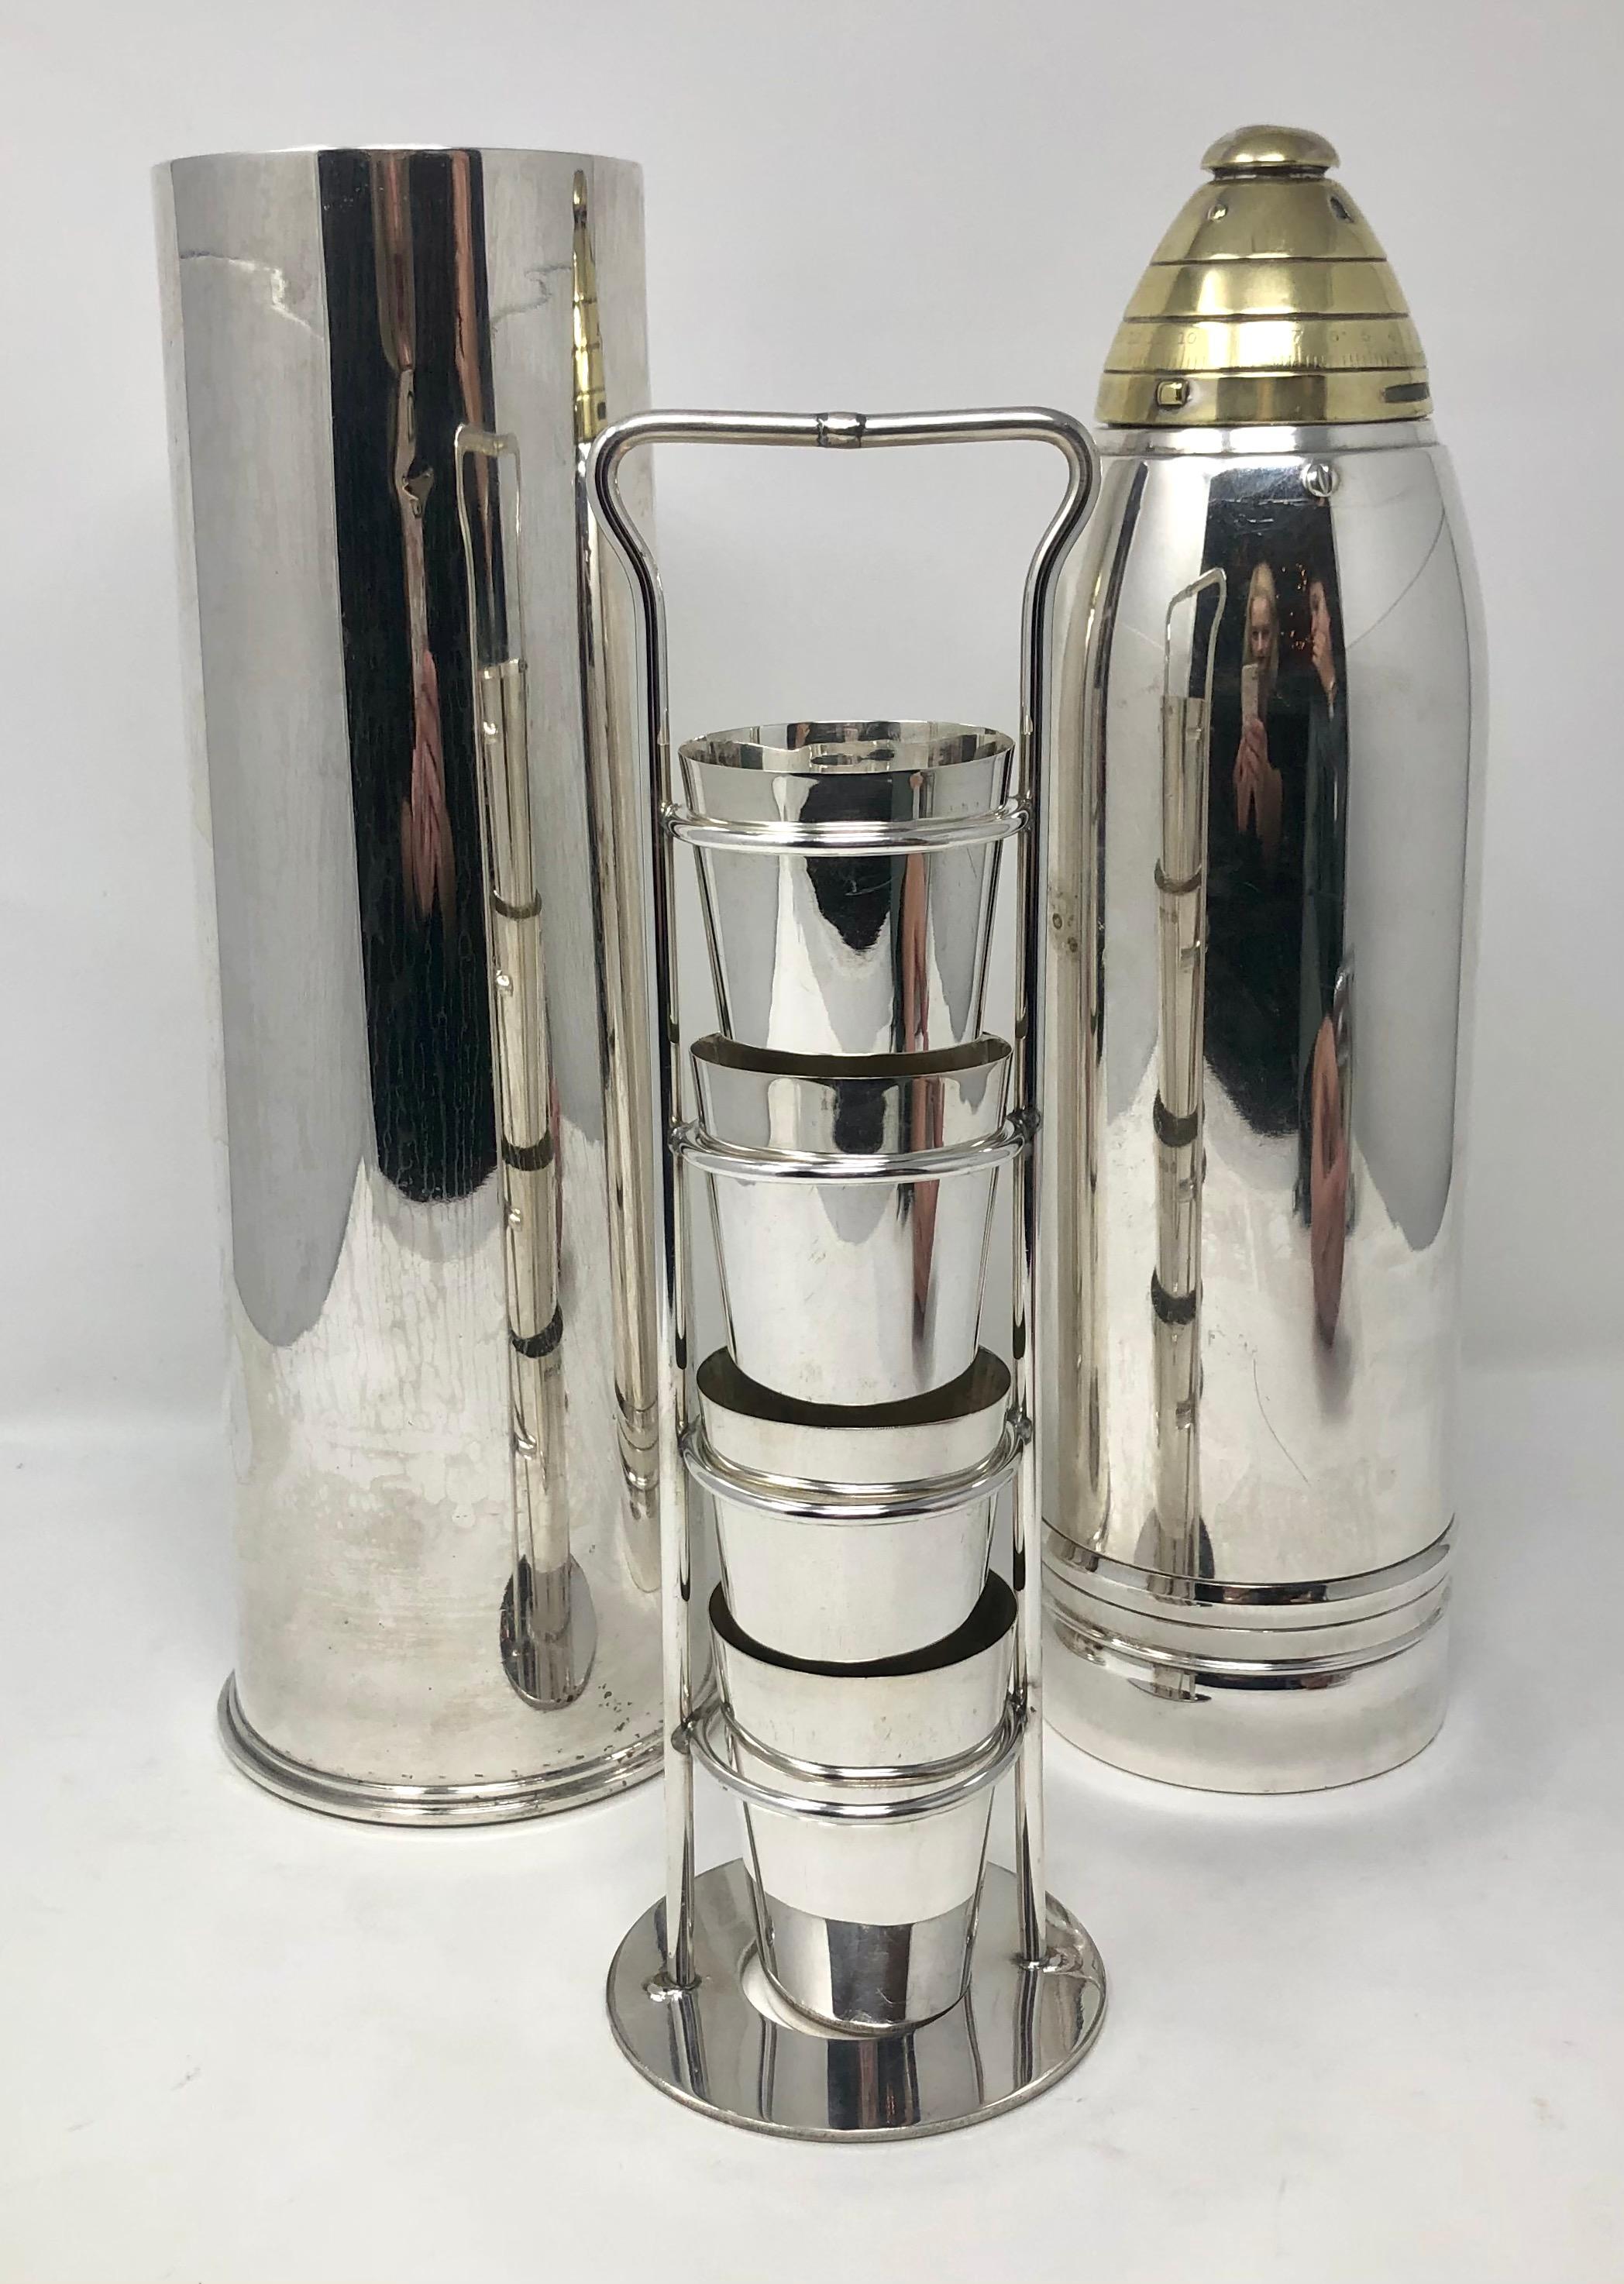 Rare state American silver plated artillery shell cocktail shaker with glasses, 1920s-1930s.